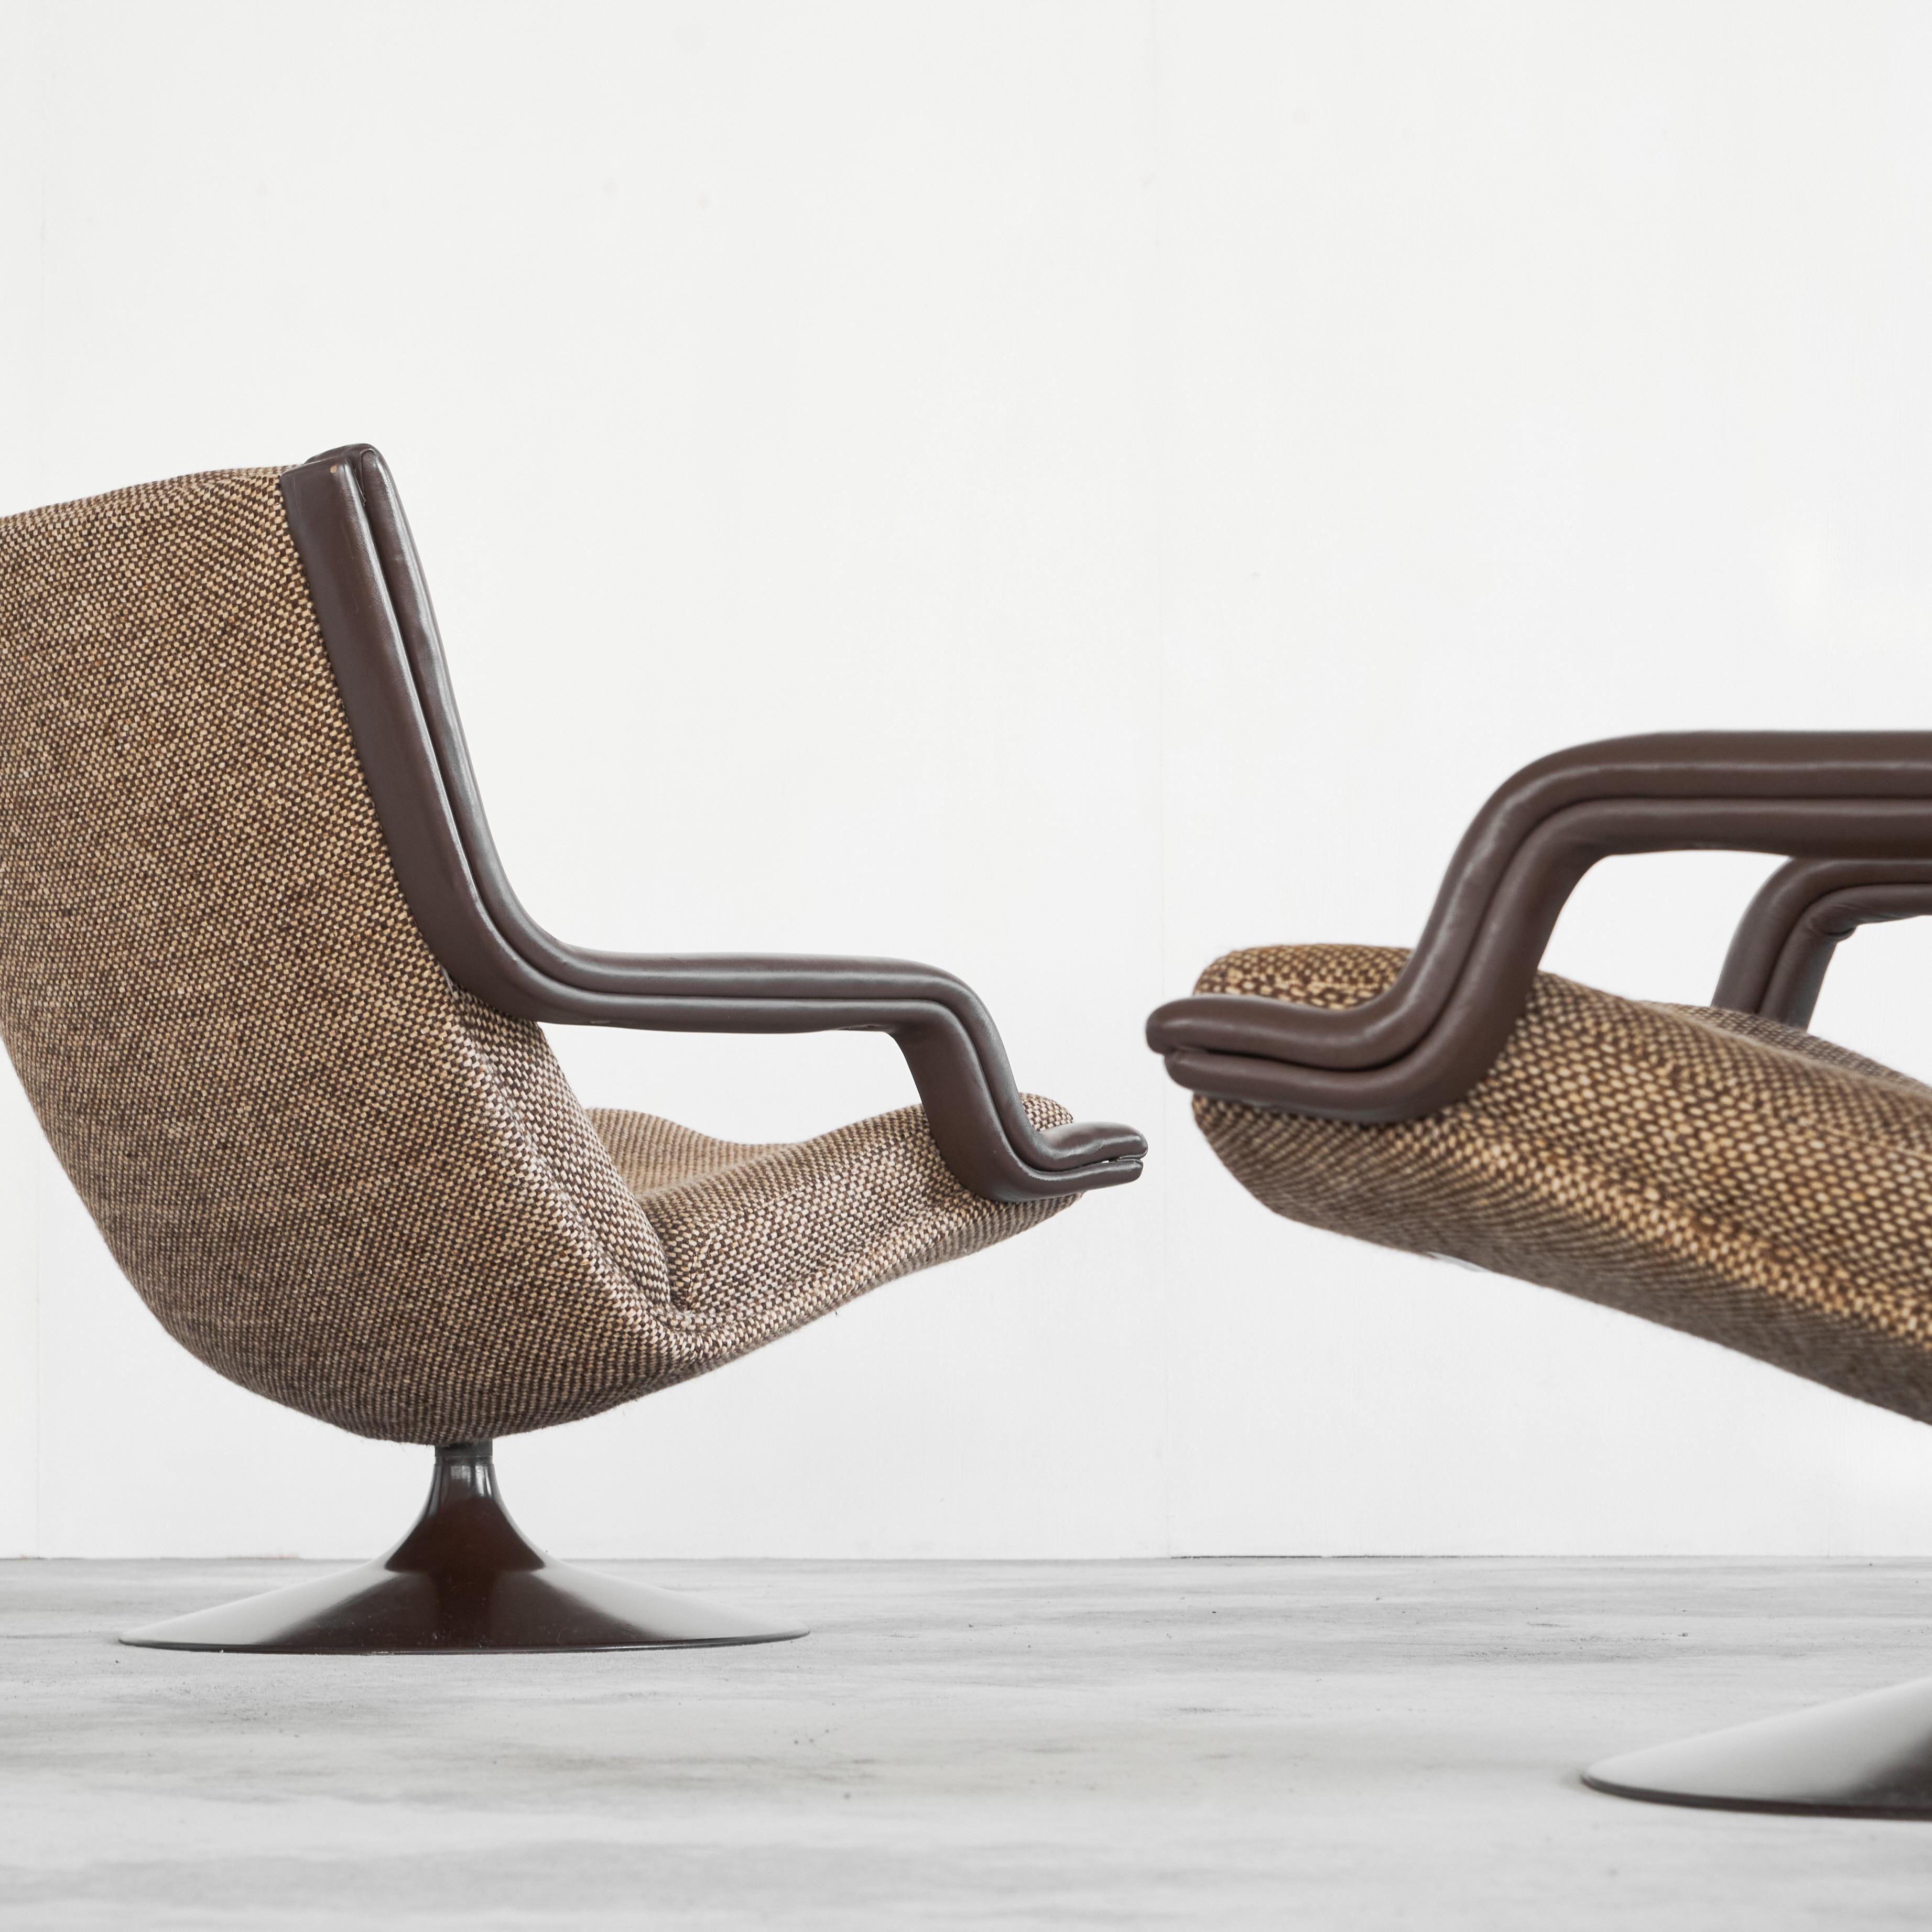 Geoffrey Harcourt Pair of F152 Lounge Chairs with Ottoman for Artifort 1975 For Sale 11